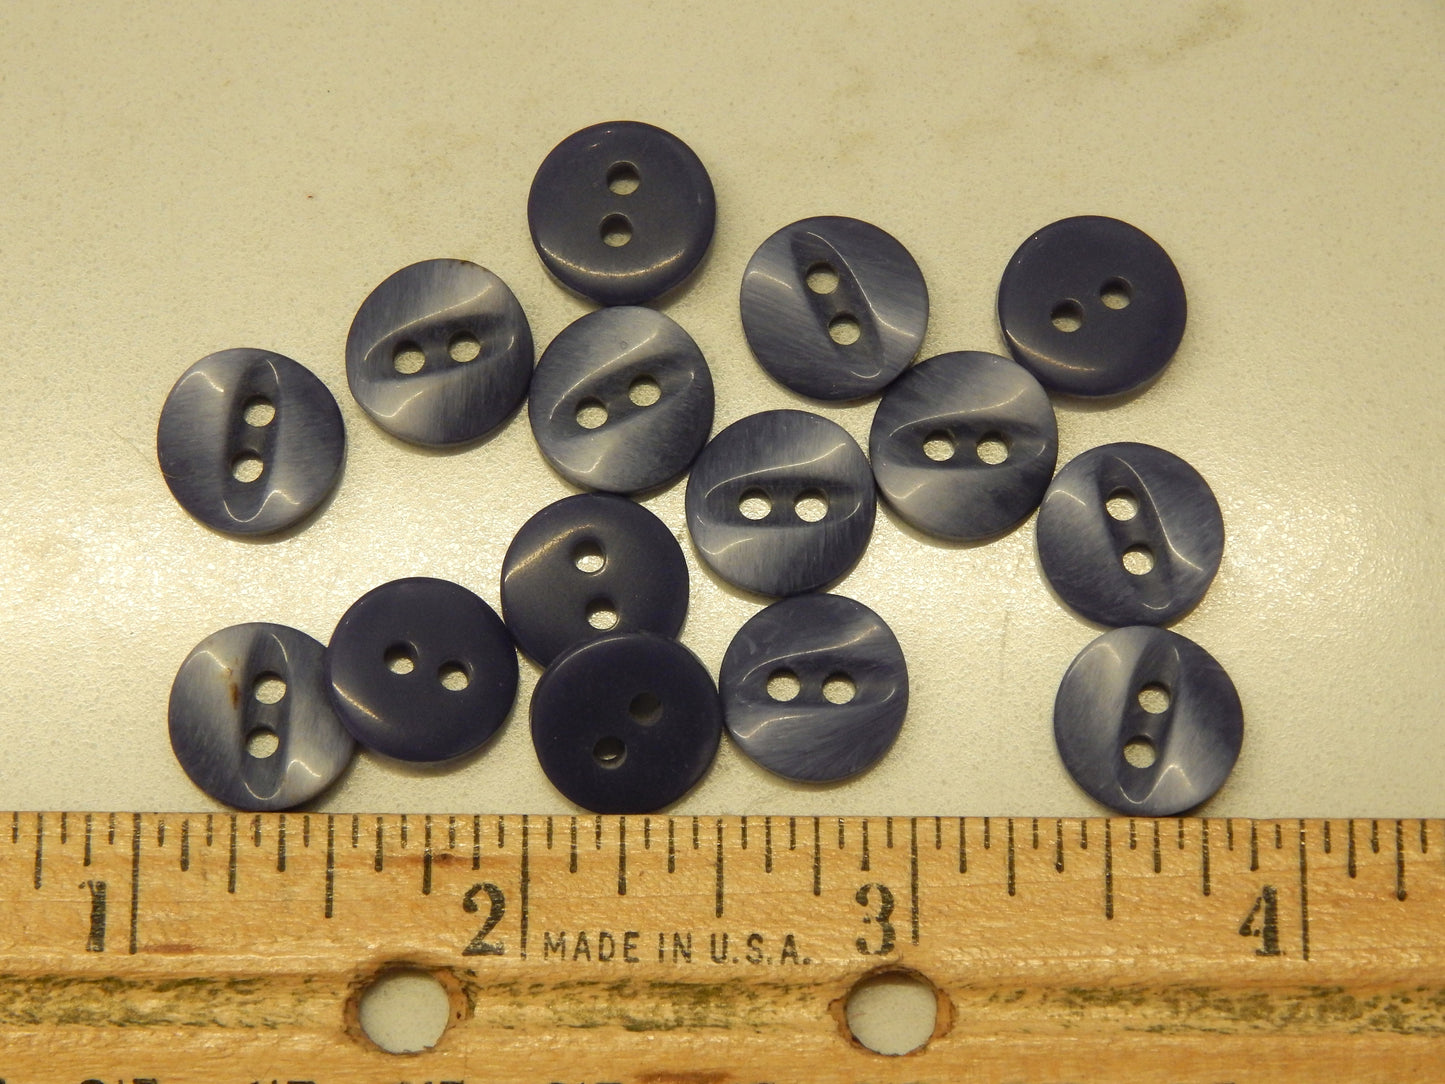 Variegated Blue Buttons